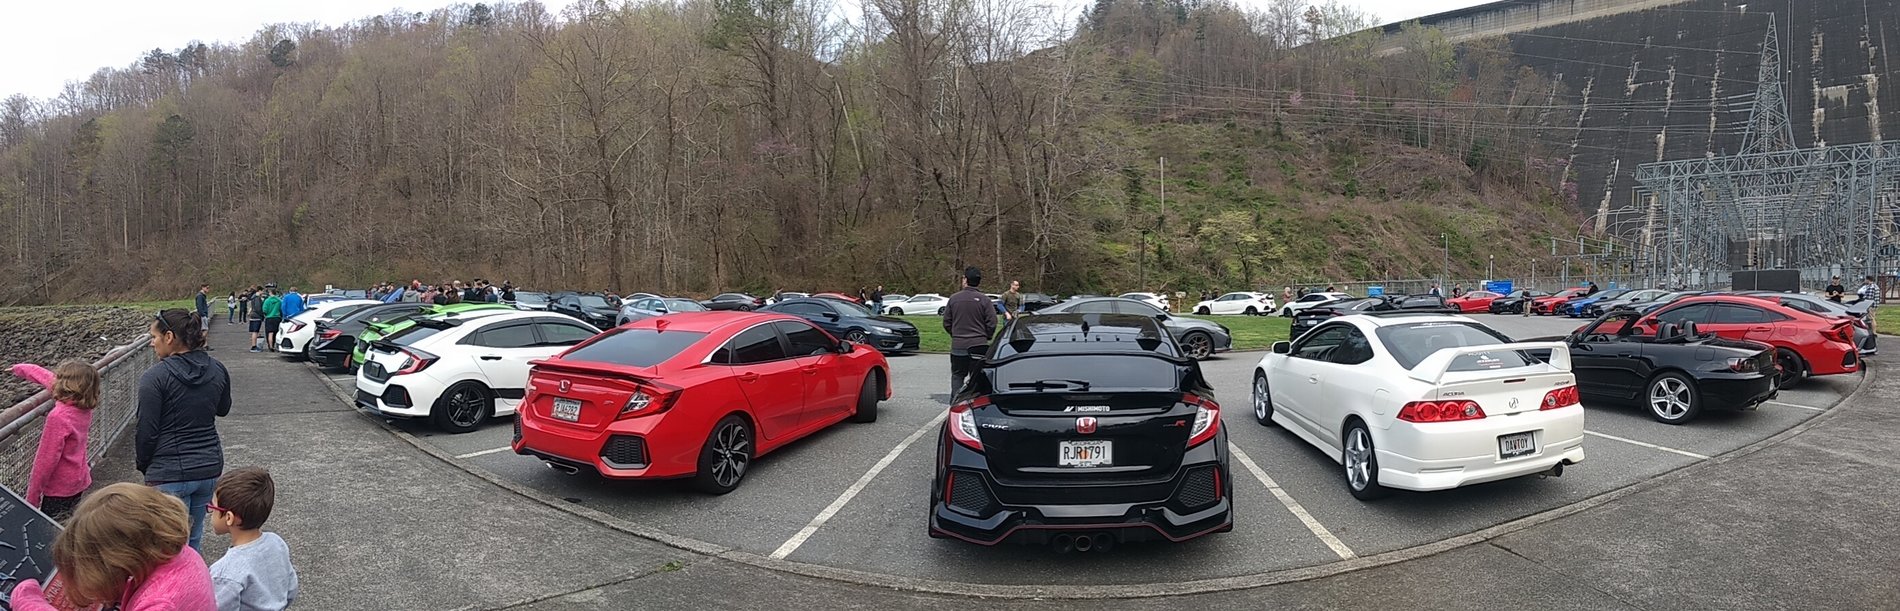 Honda Civic 10th gen Wake the Dragon 2019, Presented by KTuner! (Tail of the Dragon Meet) April 5-7 2019 IMG_20190406_091038275